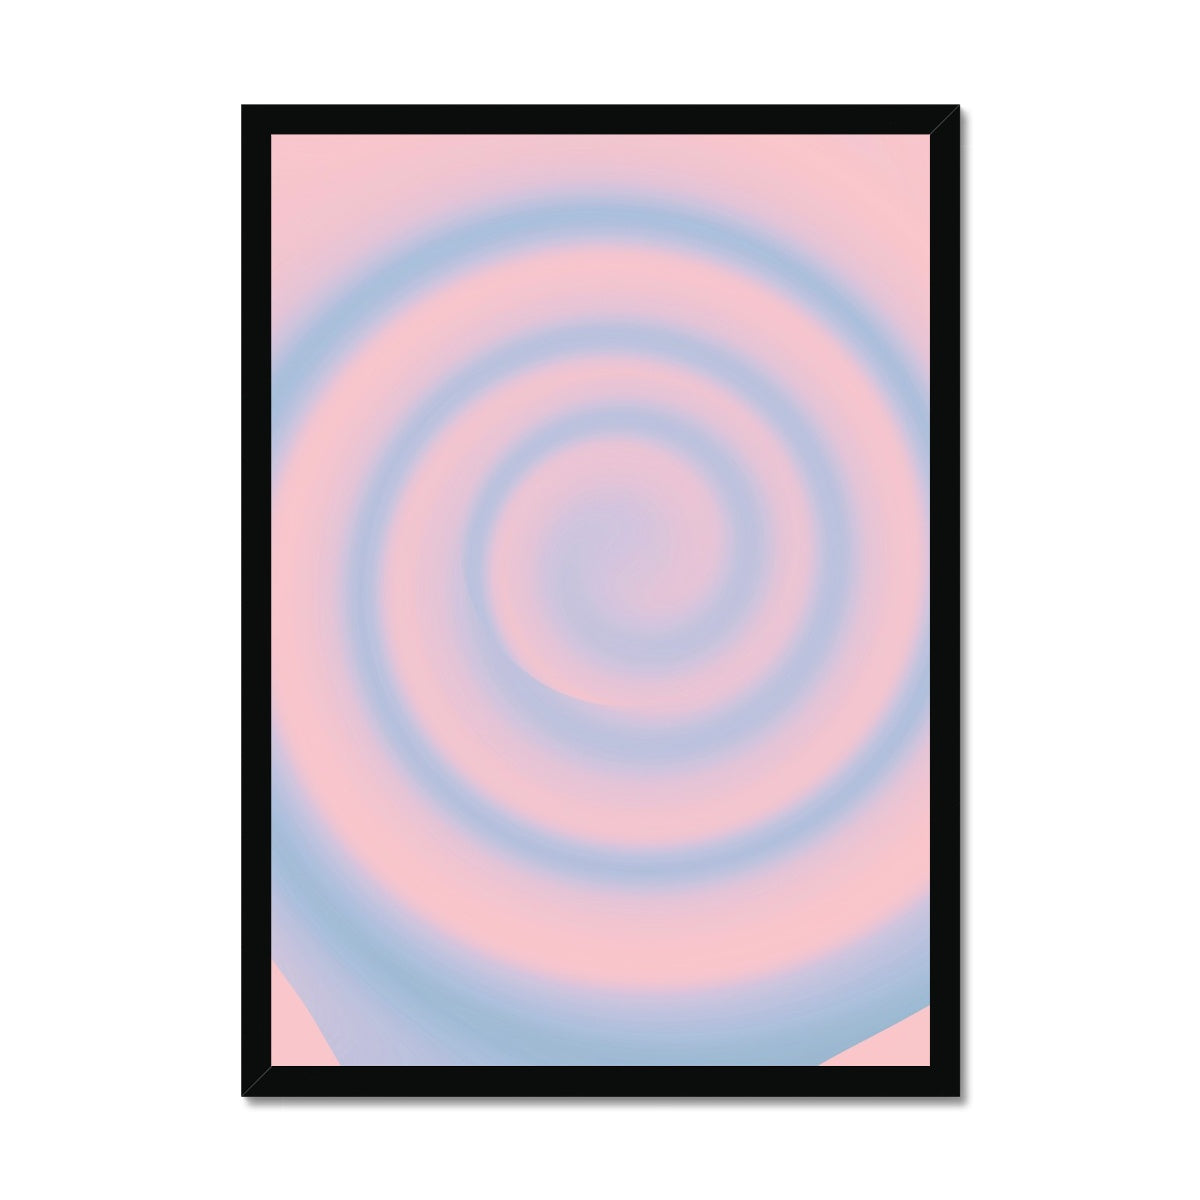 Sunset gradient aura wall art prints featuring warped pastel gradients. Colorful aura gradient posters perfect as aesthetic dorm and apartment decor.